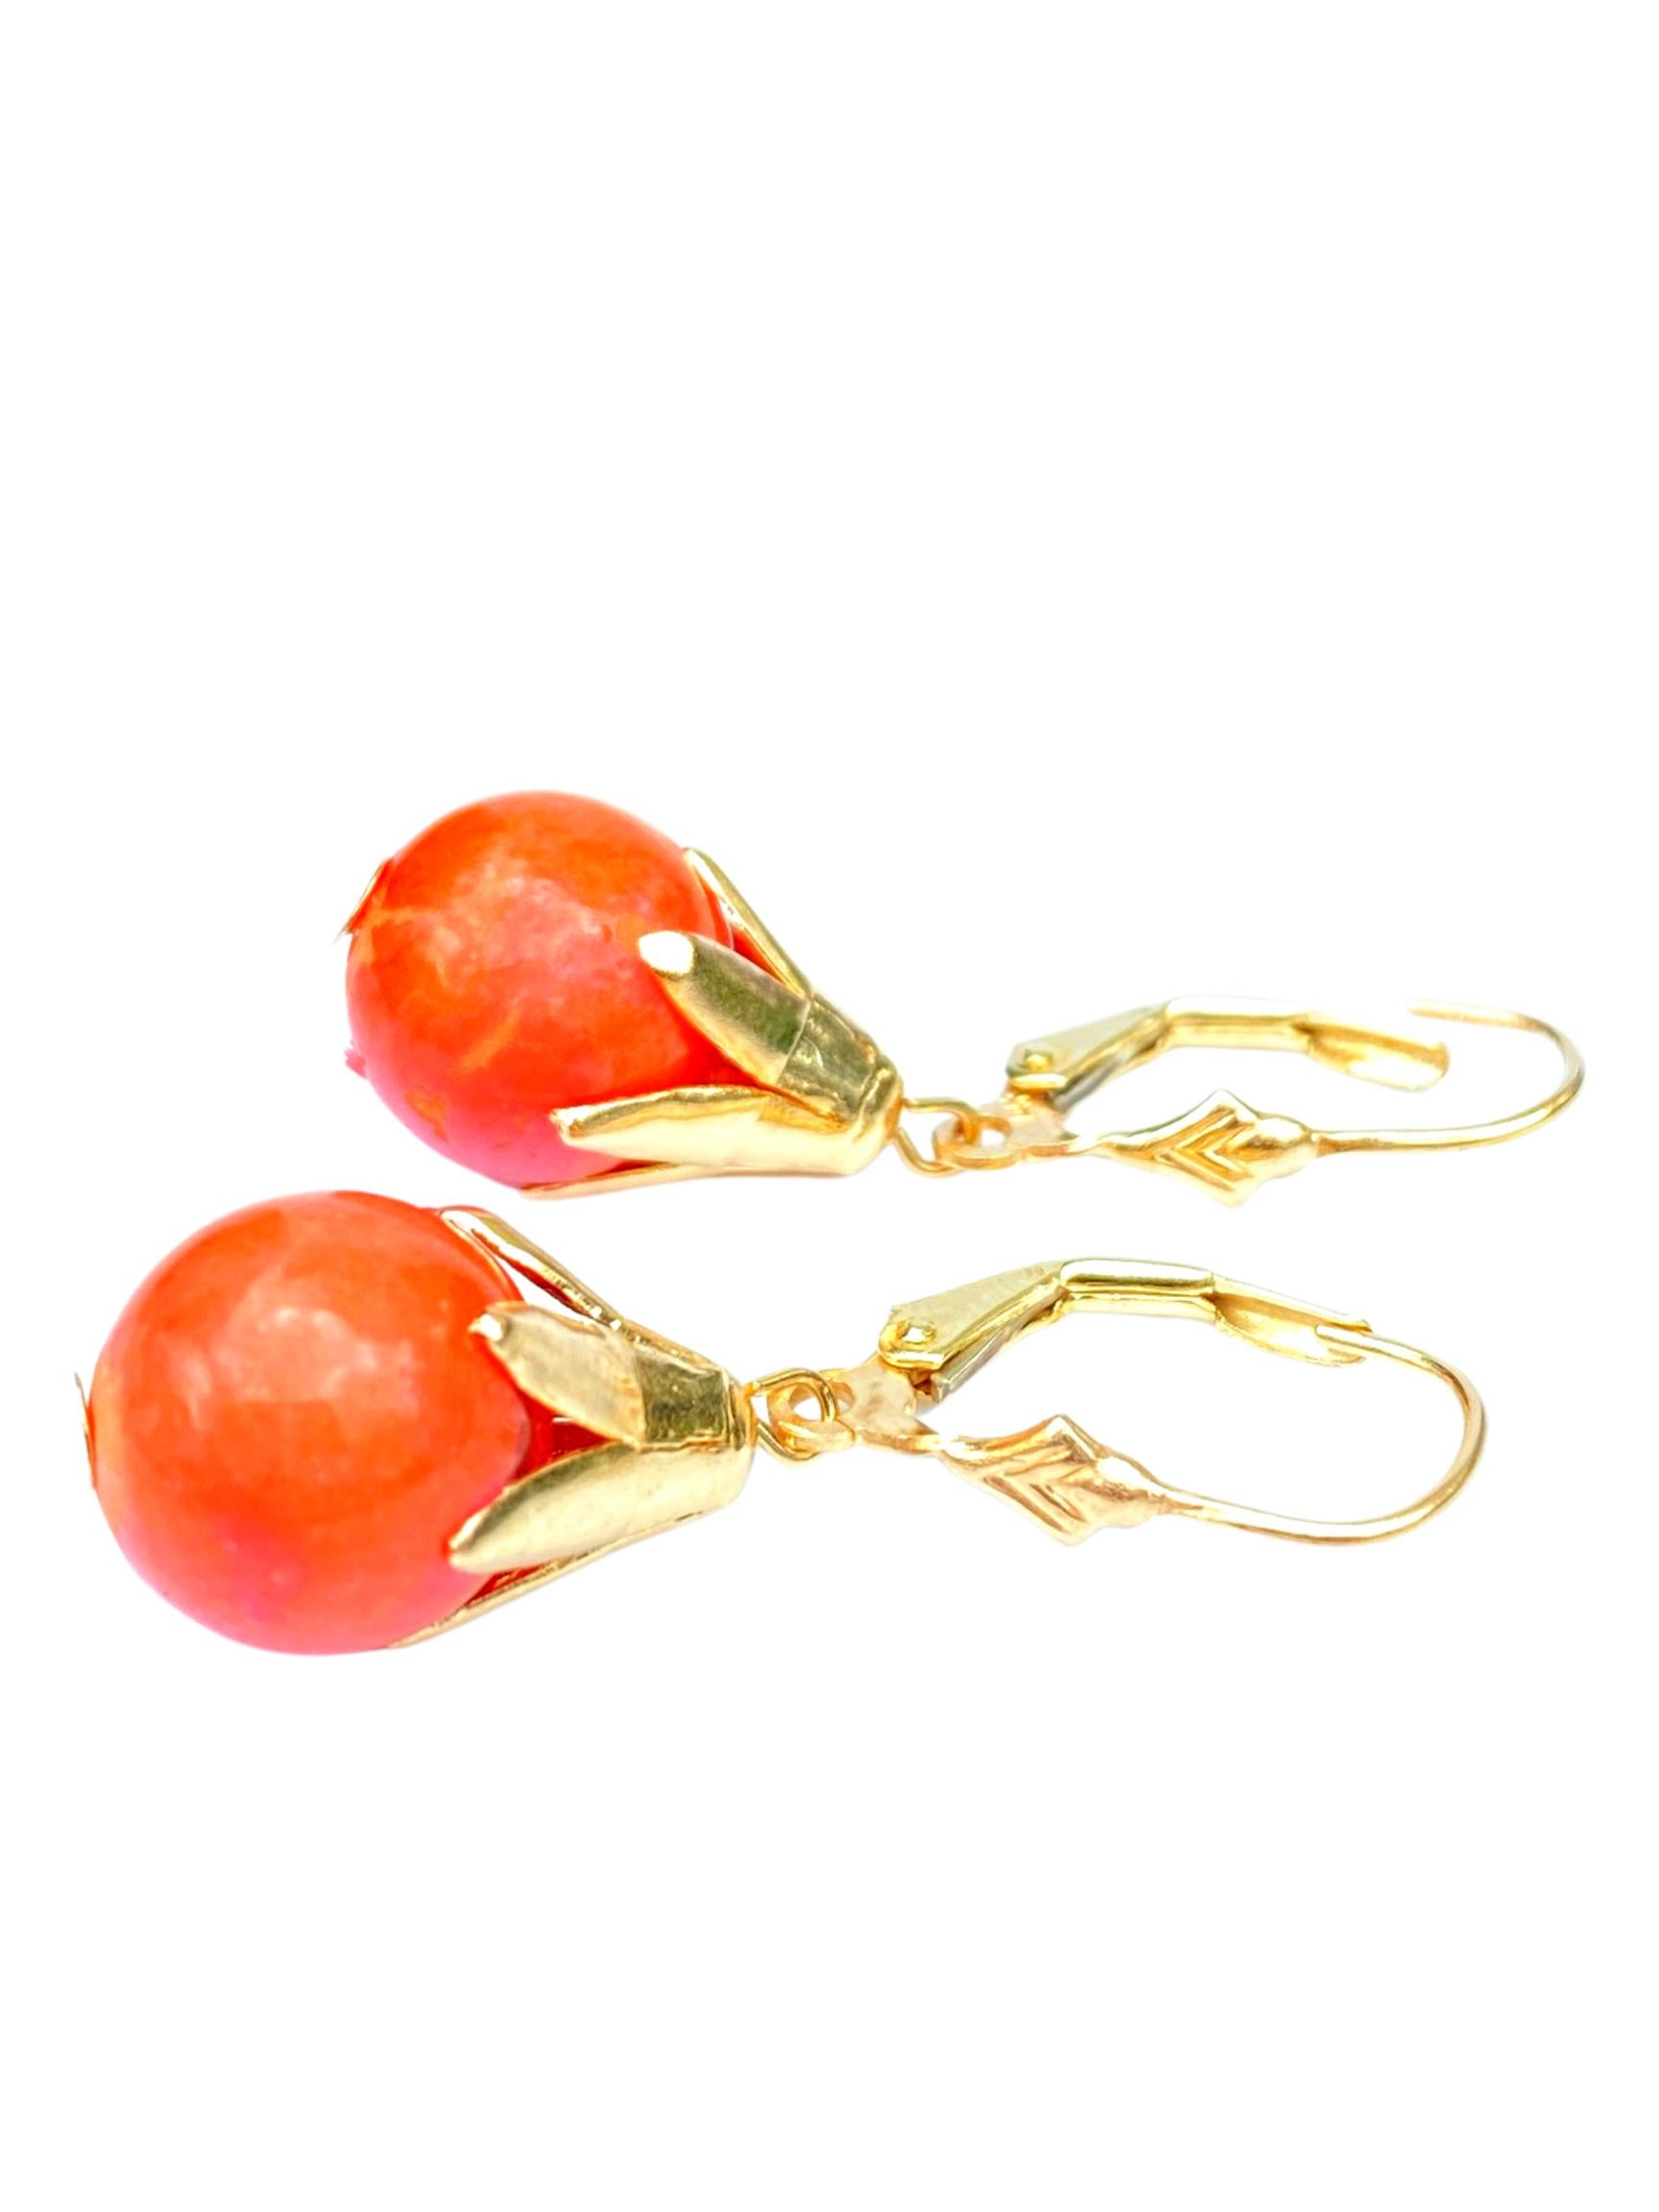 Centering two Red Coral drops and set in 4.6 grams of Yellow Gold. 

Details:
✔ Stone: Red Coral 
✔ Stone Cut: Pearl
✔ Stone Color: Red
✔ Earrings: 14K Yellow Gold, 
✔ Era: 1980's
✔ Metal: 14K Yellow Gold
✔ Total Earring Weight (Grams): 4.6 Grams
